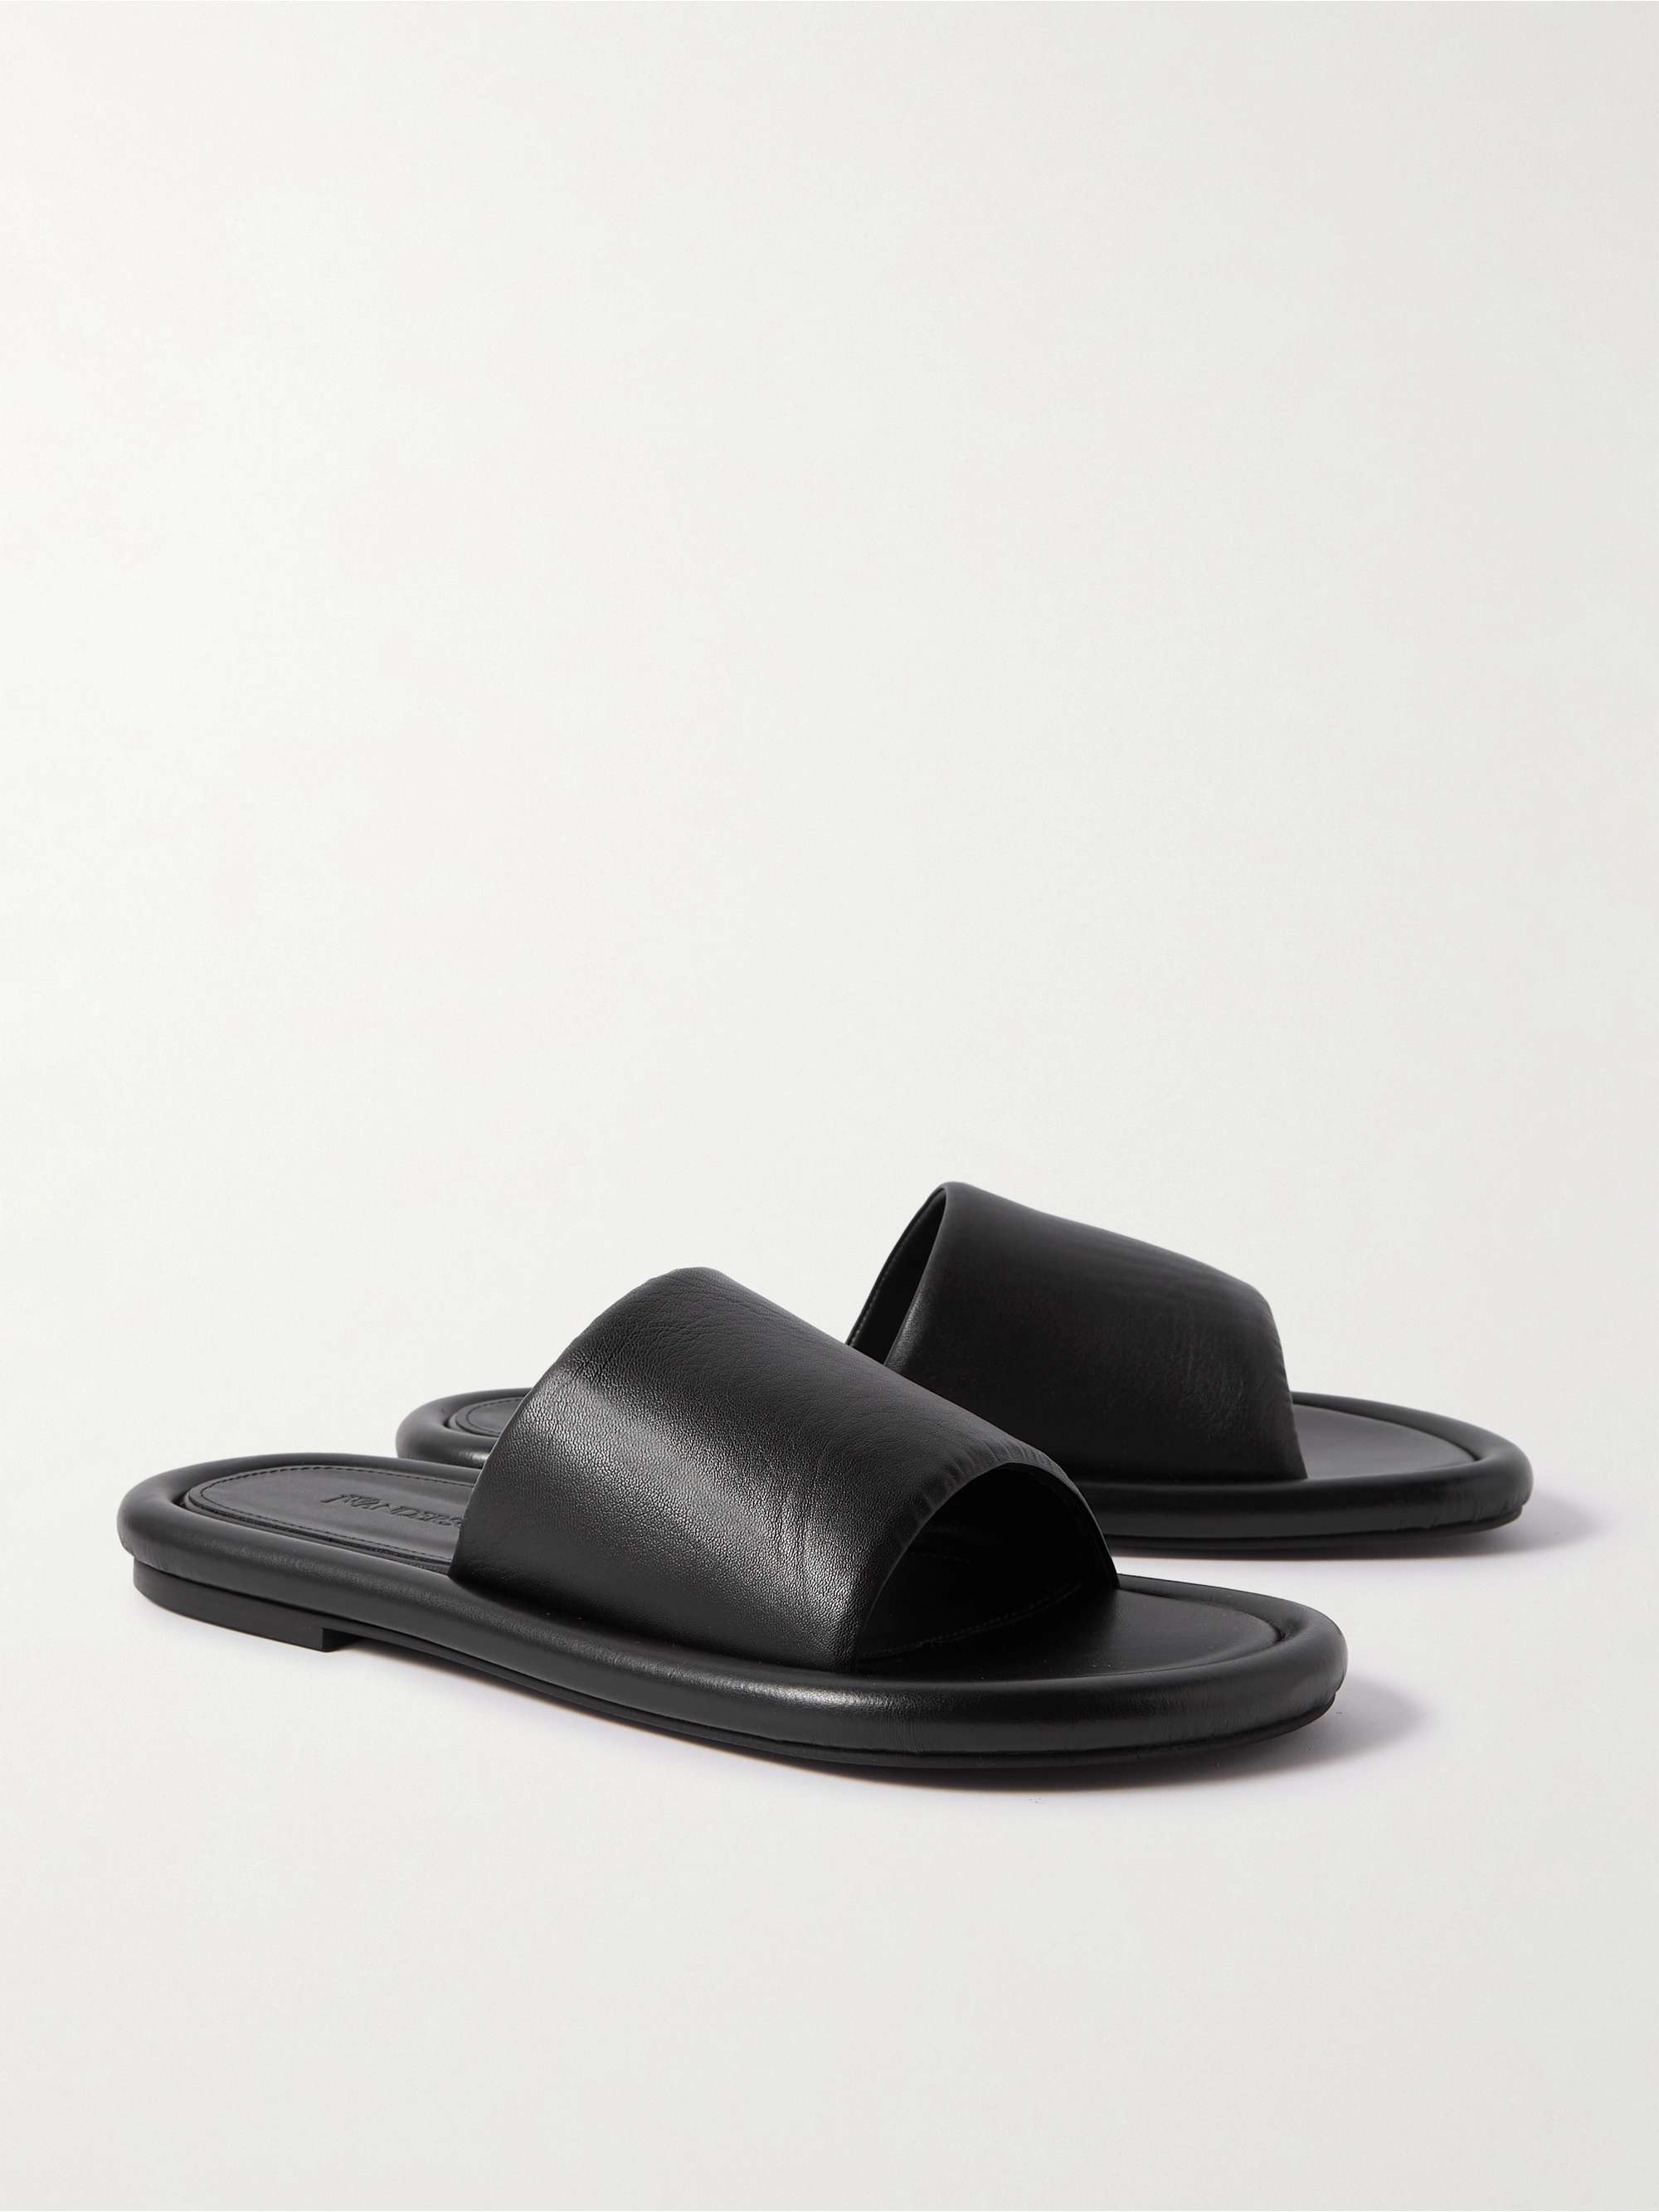 JW ANDERSON Two-Tone Leather Slippers